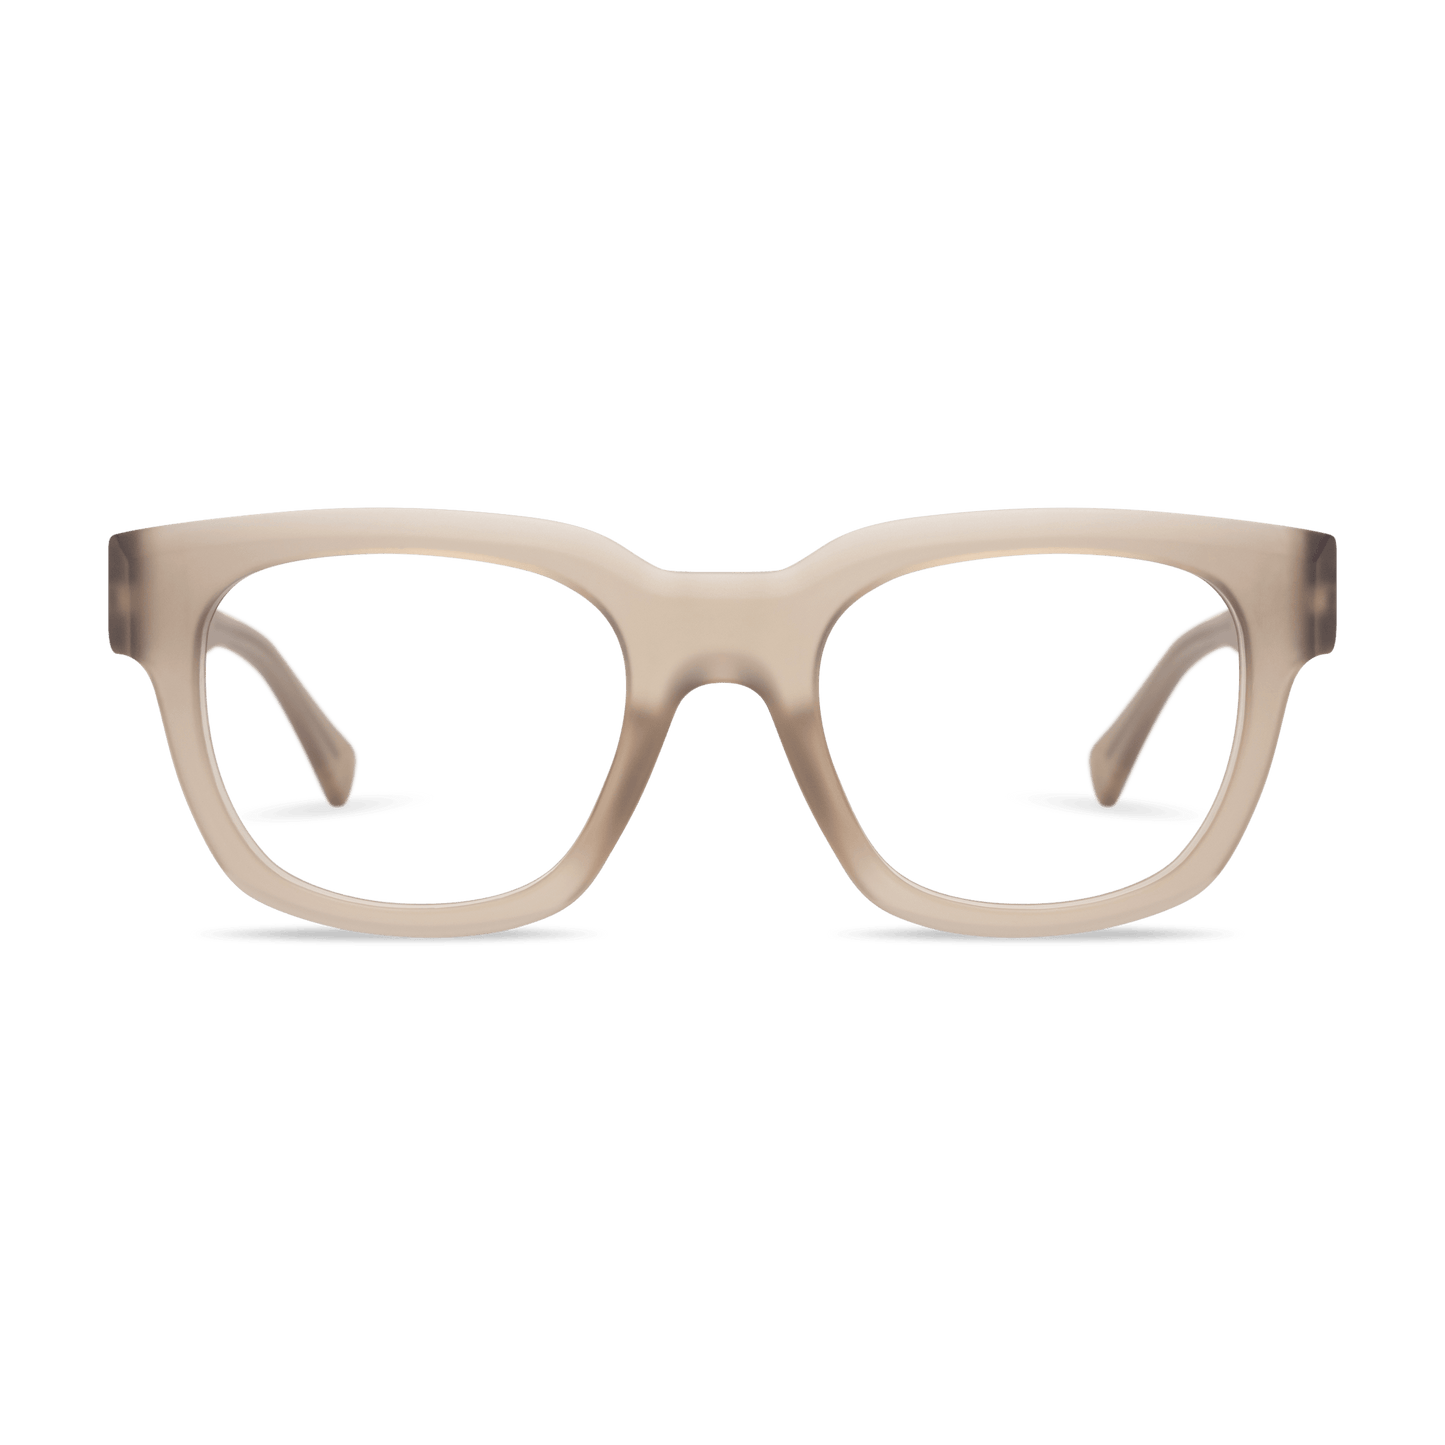 Kaine Readers READING GLASSES LOOK OPTIC Taupe +1.00 